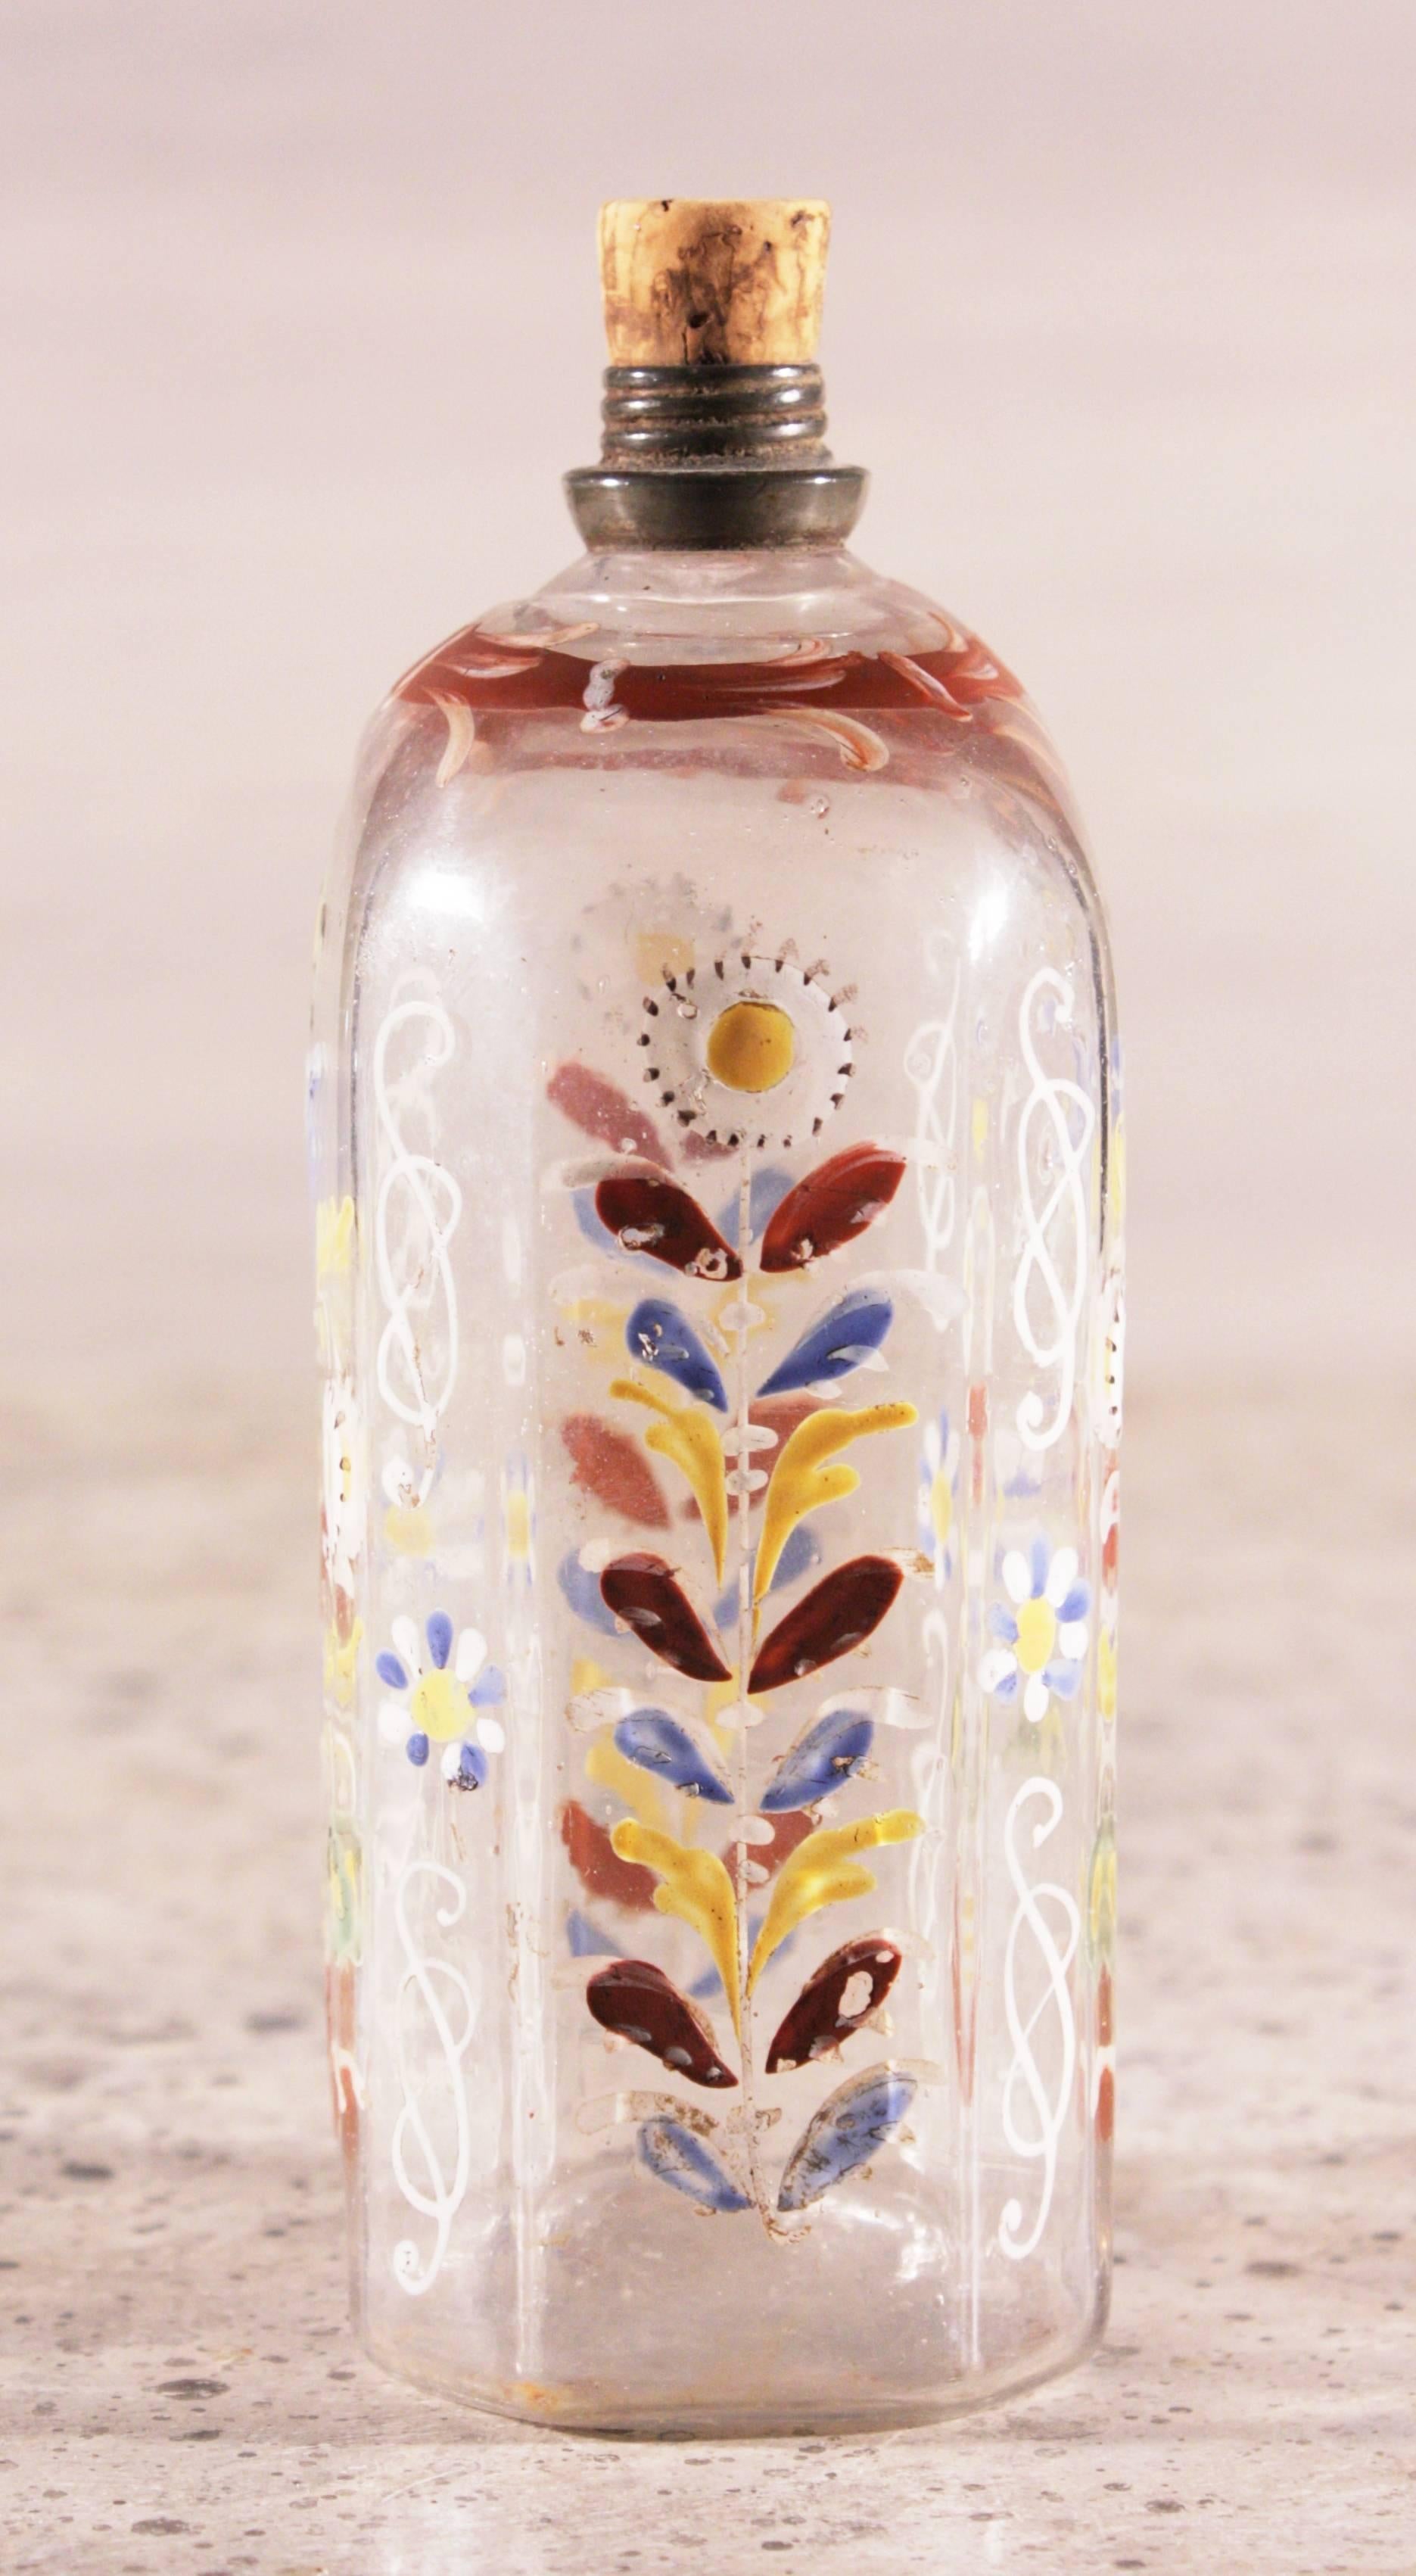 A sweet little enamel decorated decanter or scent bottle attributed to the Baron Stiegel glassworks, circa 1790 with pewter threaded top (cap missing) and a Pontil scar on base.